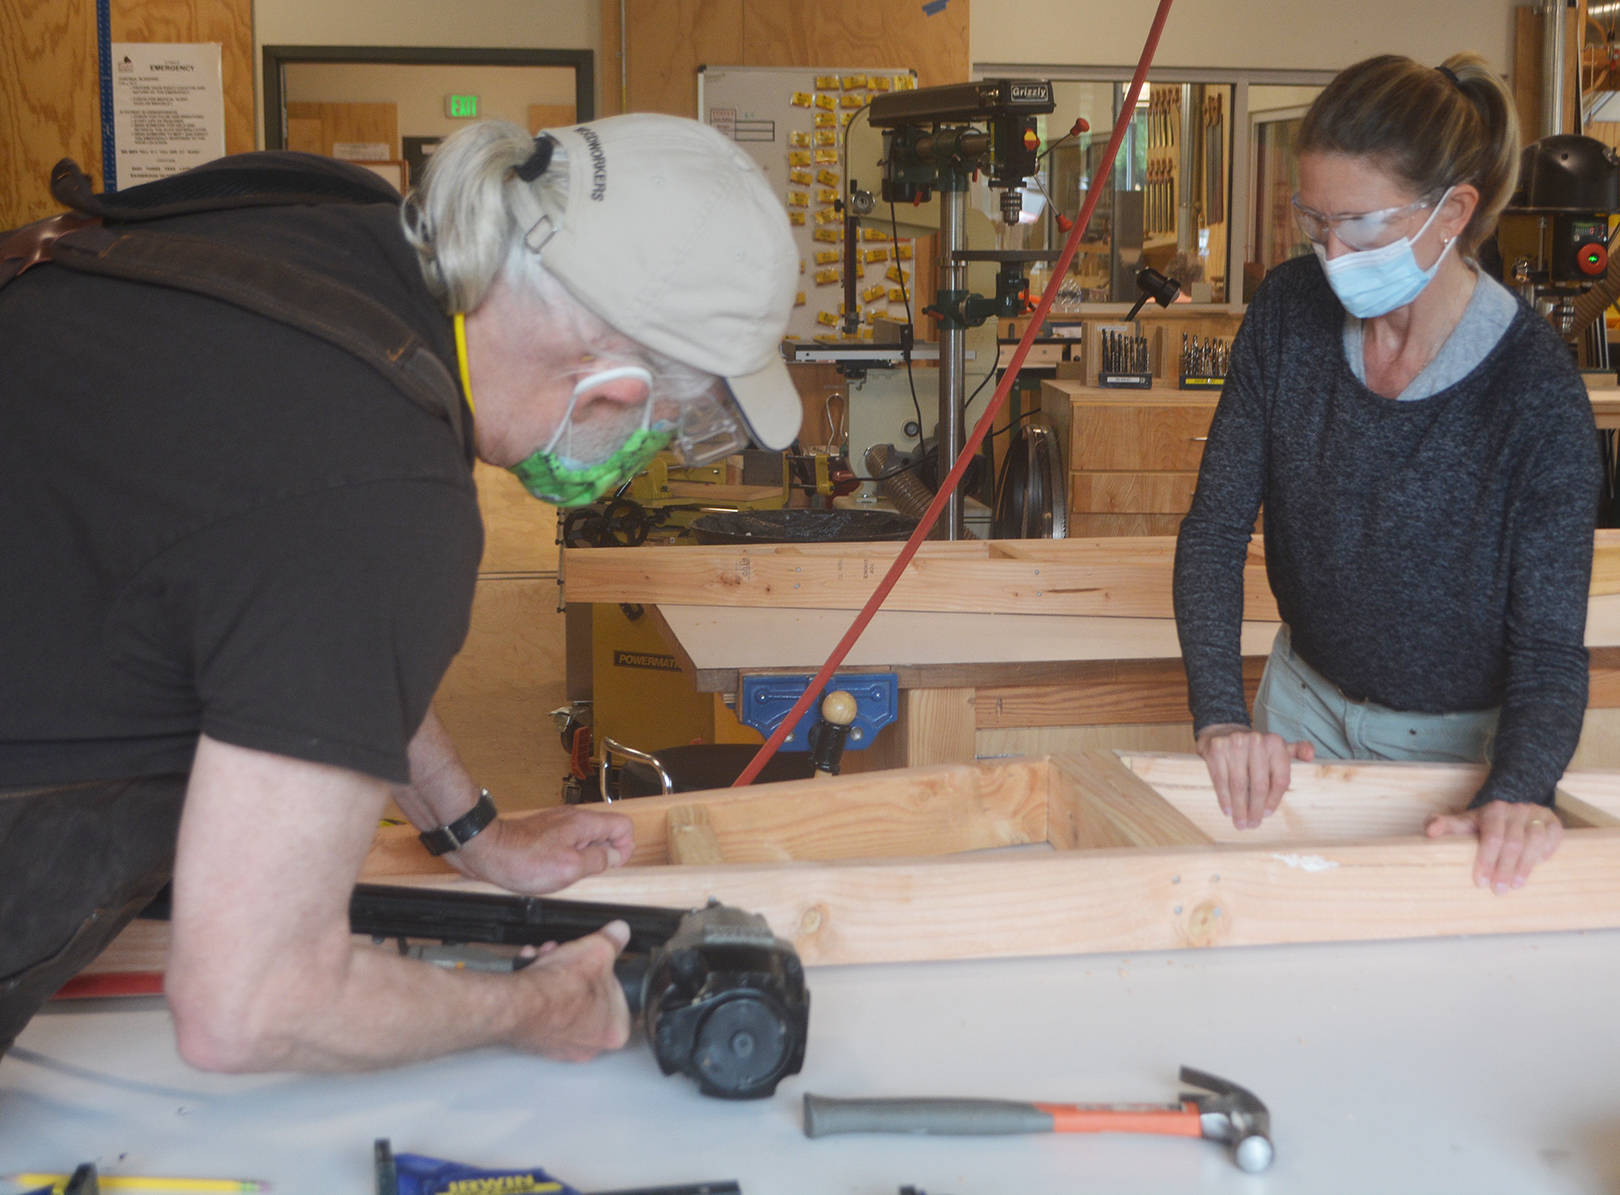 "Stretch" uses a nail gun as he puts together one of the rafters, while Tammy Galbraith observes.